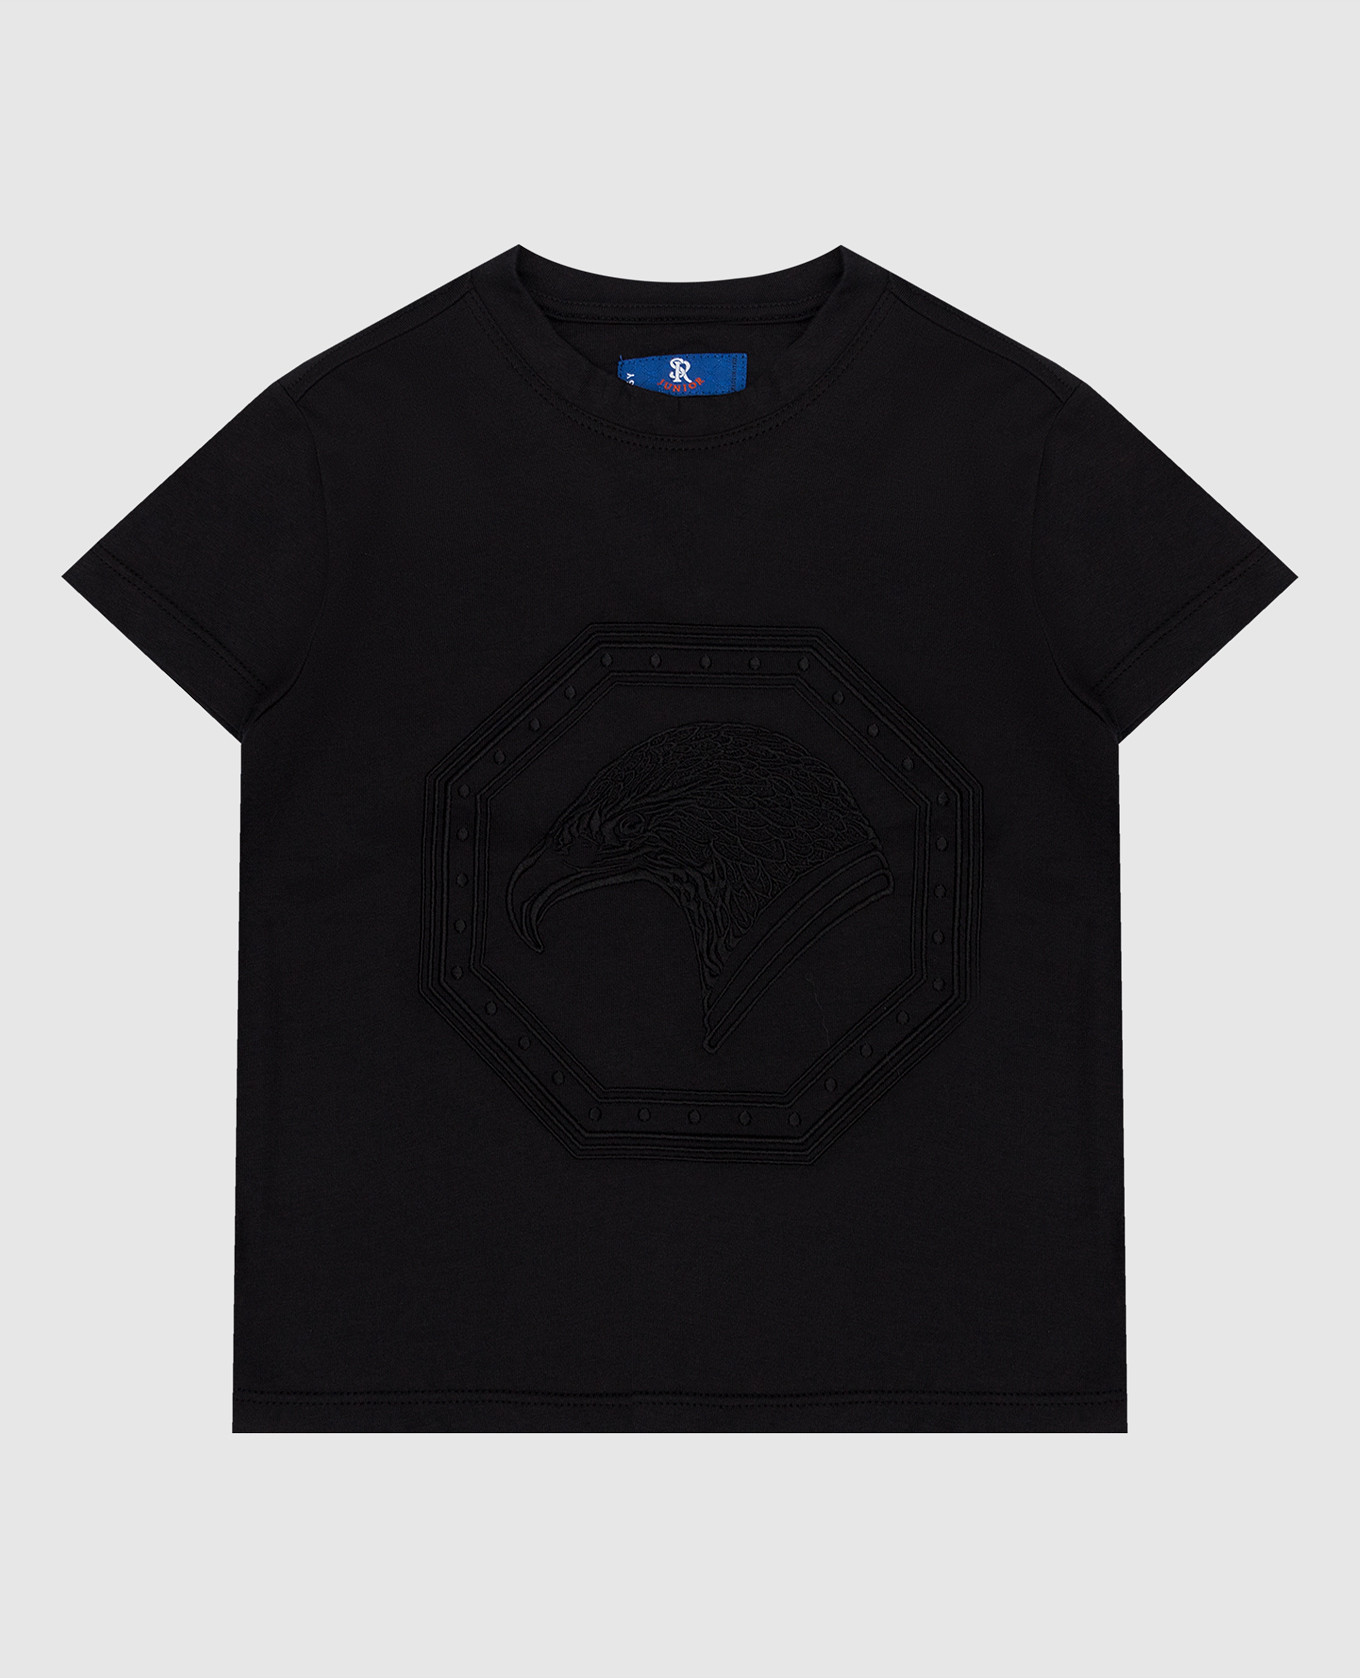 Children's black t-shirt with emblem embroidery